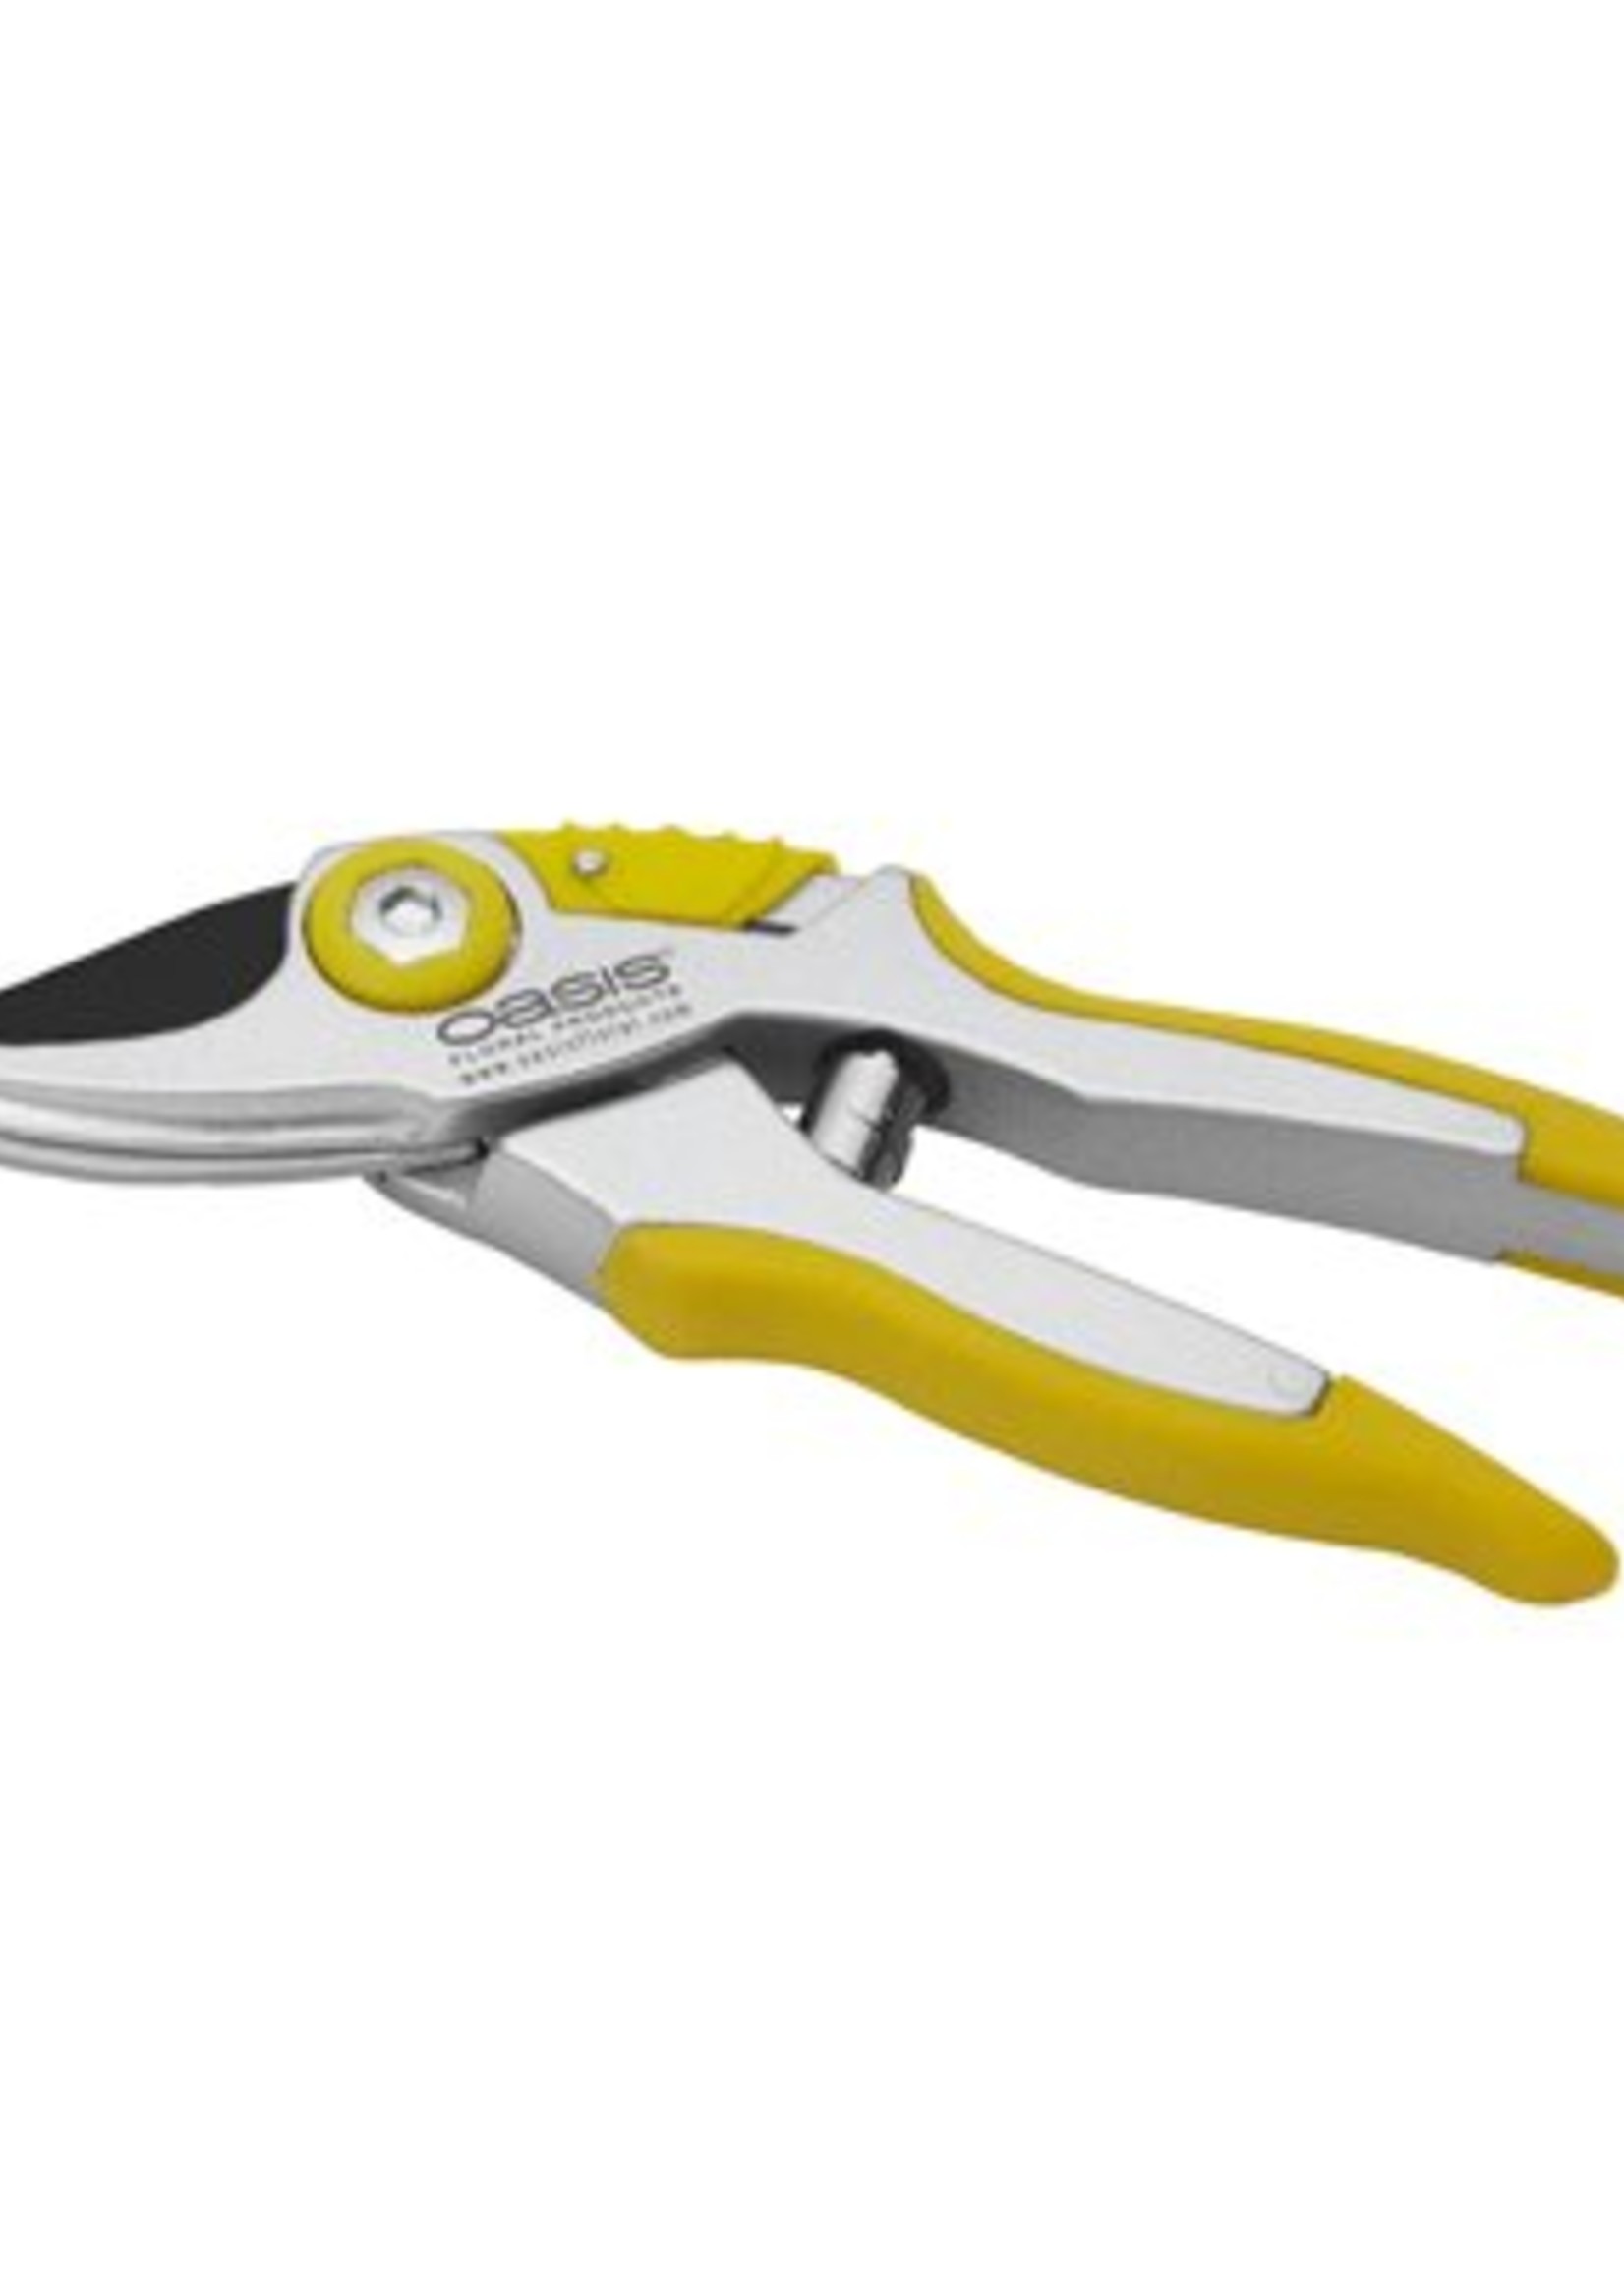 OASIS® Branch Cutters